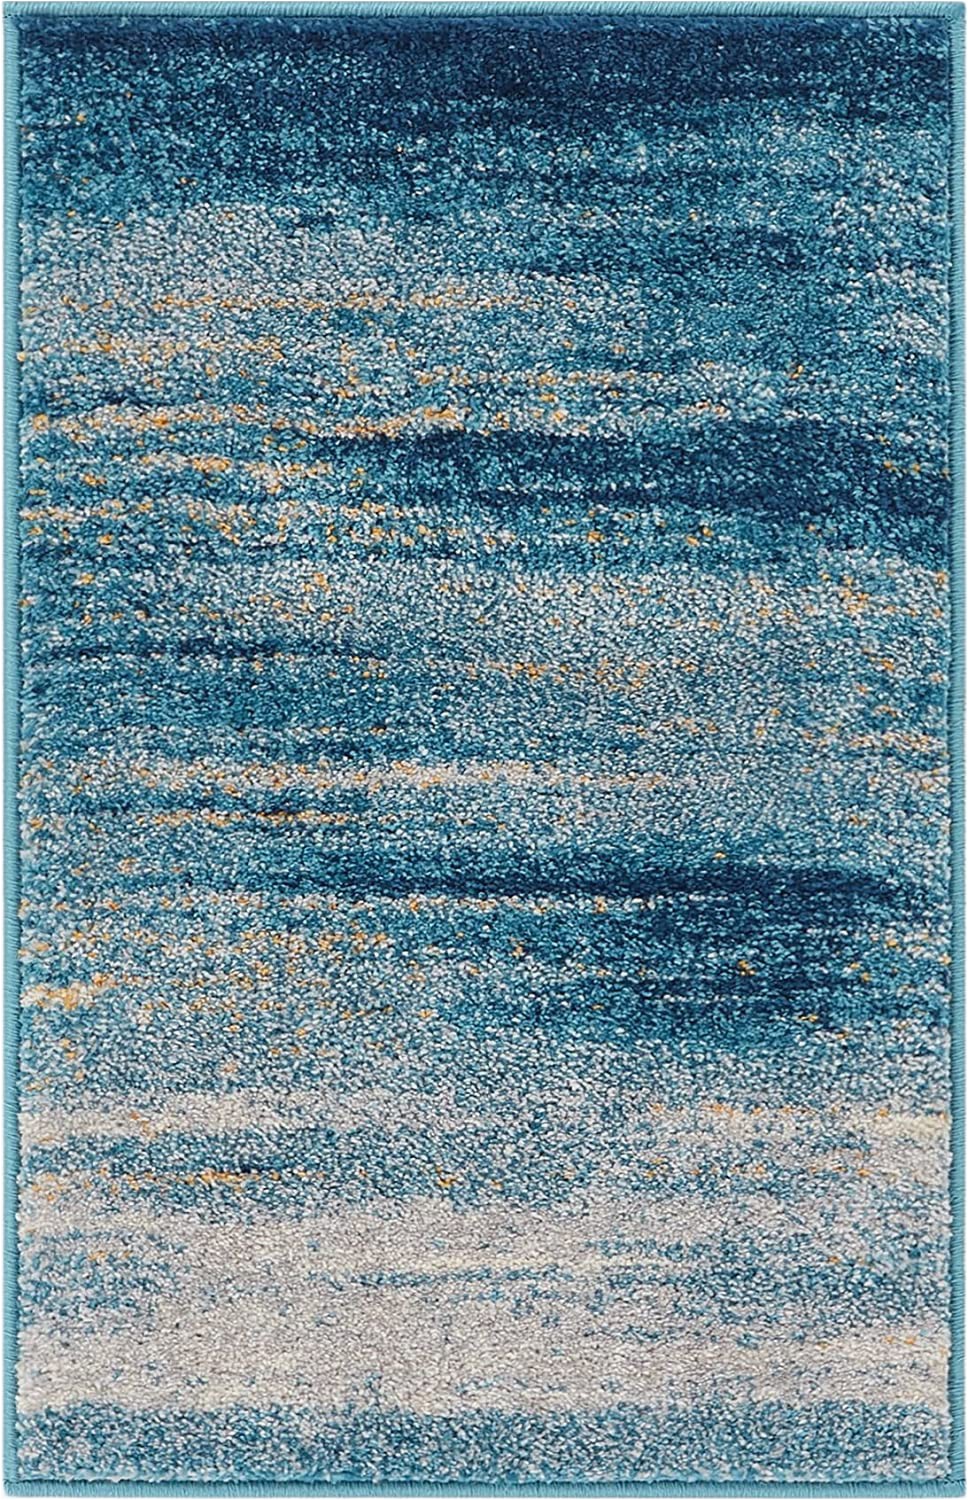 Blue Ombre Rug 8×10 Well Woven Layla Stripes Blue Tribal area Rug 20×31 20" X 31" Mat soft Plush Faded Abstract Modern Carpet